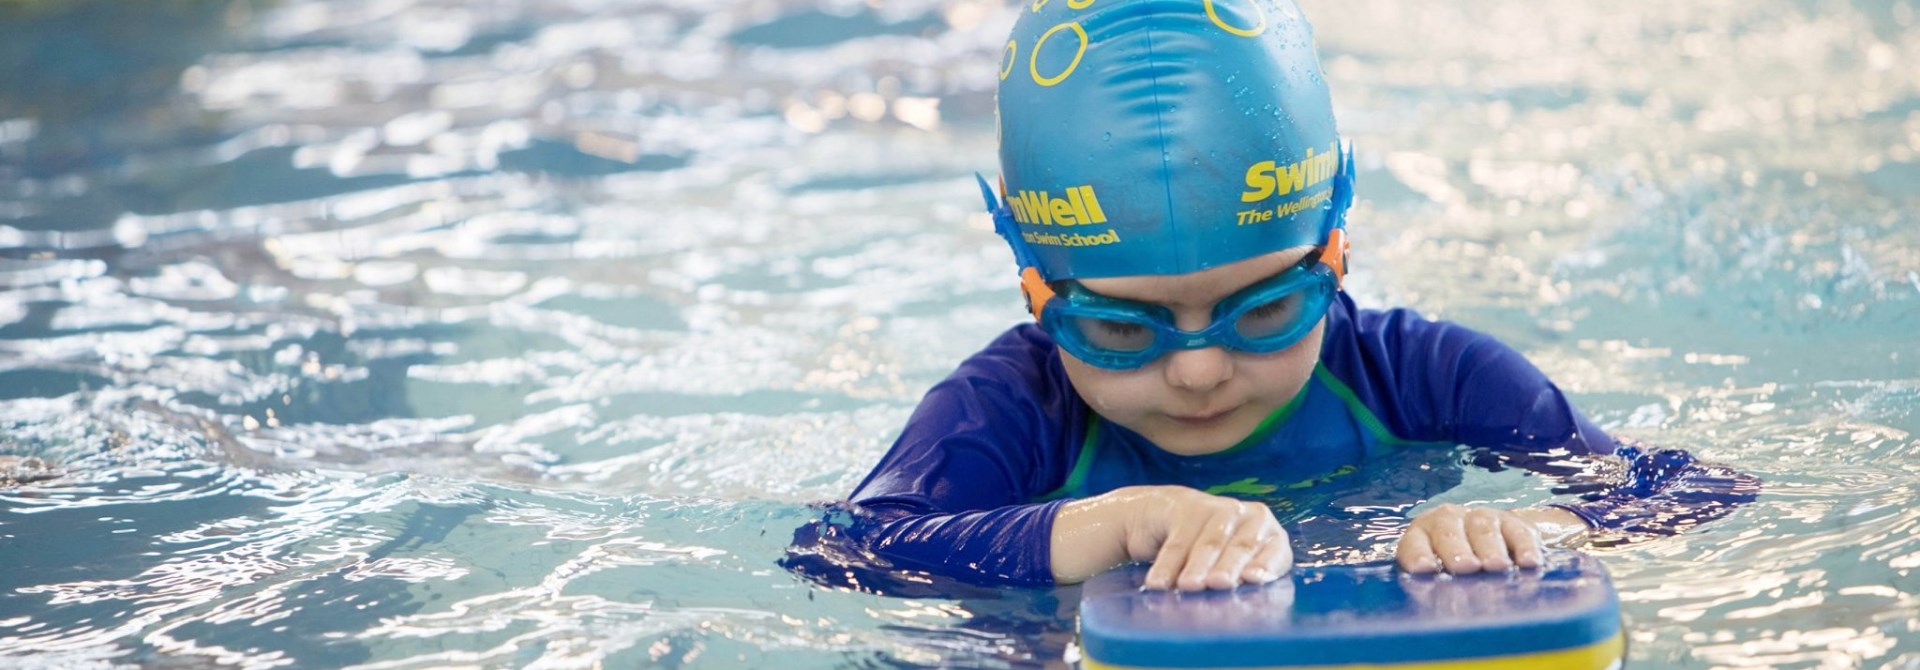 A young child with blue swimsuit, swimming cap and googles on, concentrating while using a flutter board in the pool.